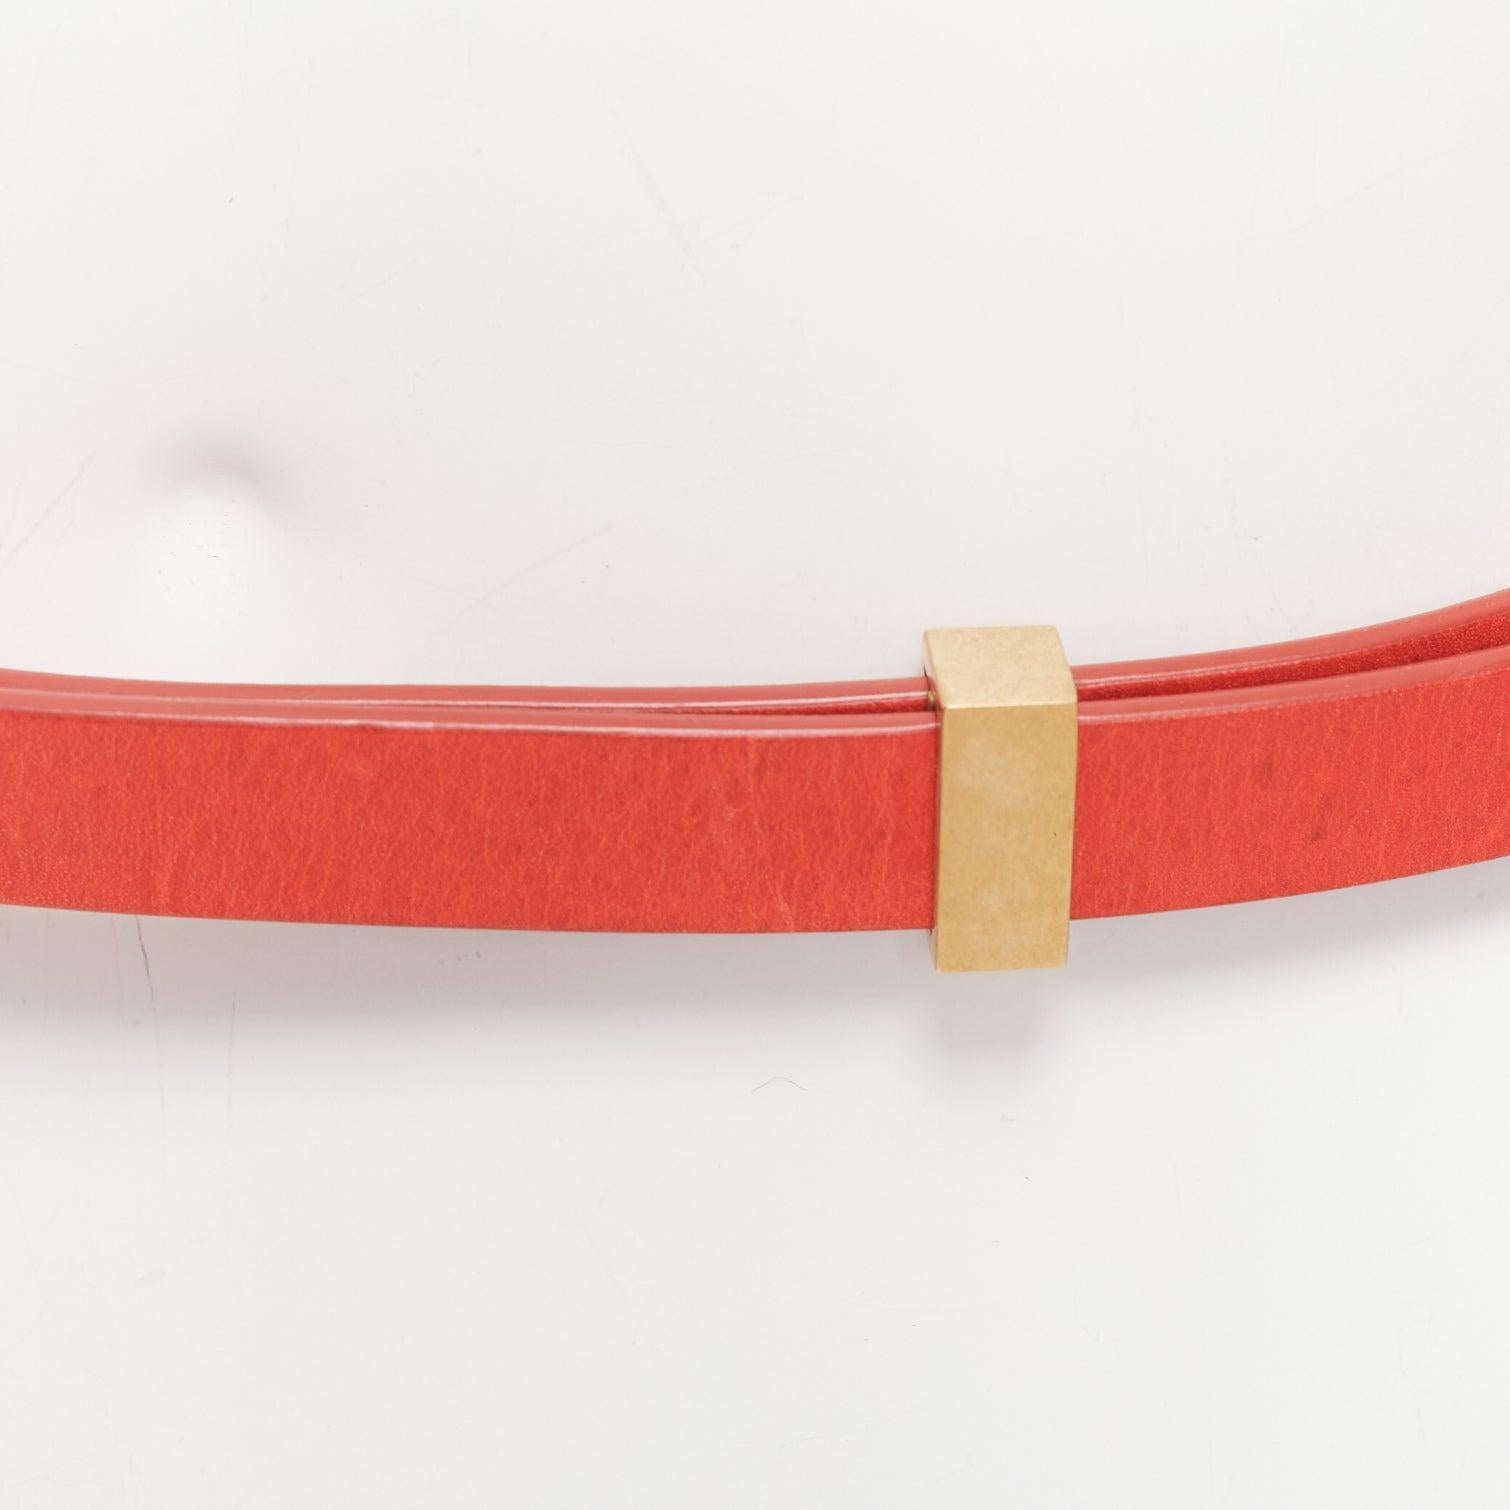 CELINE Phoebe Philo red smooth leather gold metal bar skinny belt XS
Reference: AAWC/A01196
Brand: Celine
Designer: Phoebe Philo
Material: Leather, Metal
Color: Red, Gold
Pattern: Solid
Closure: Belt
Lining: Red Leather
Extra Details: Slightly